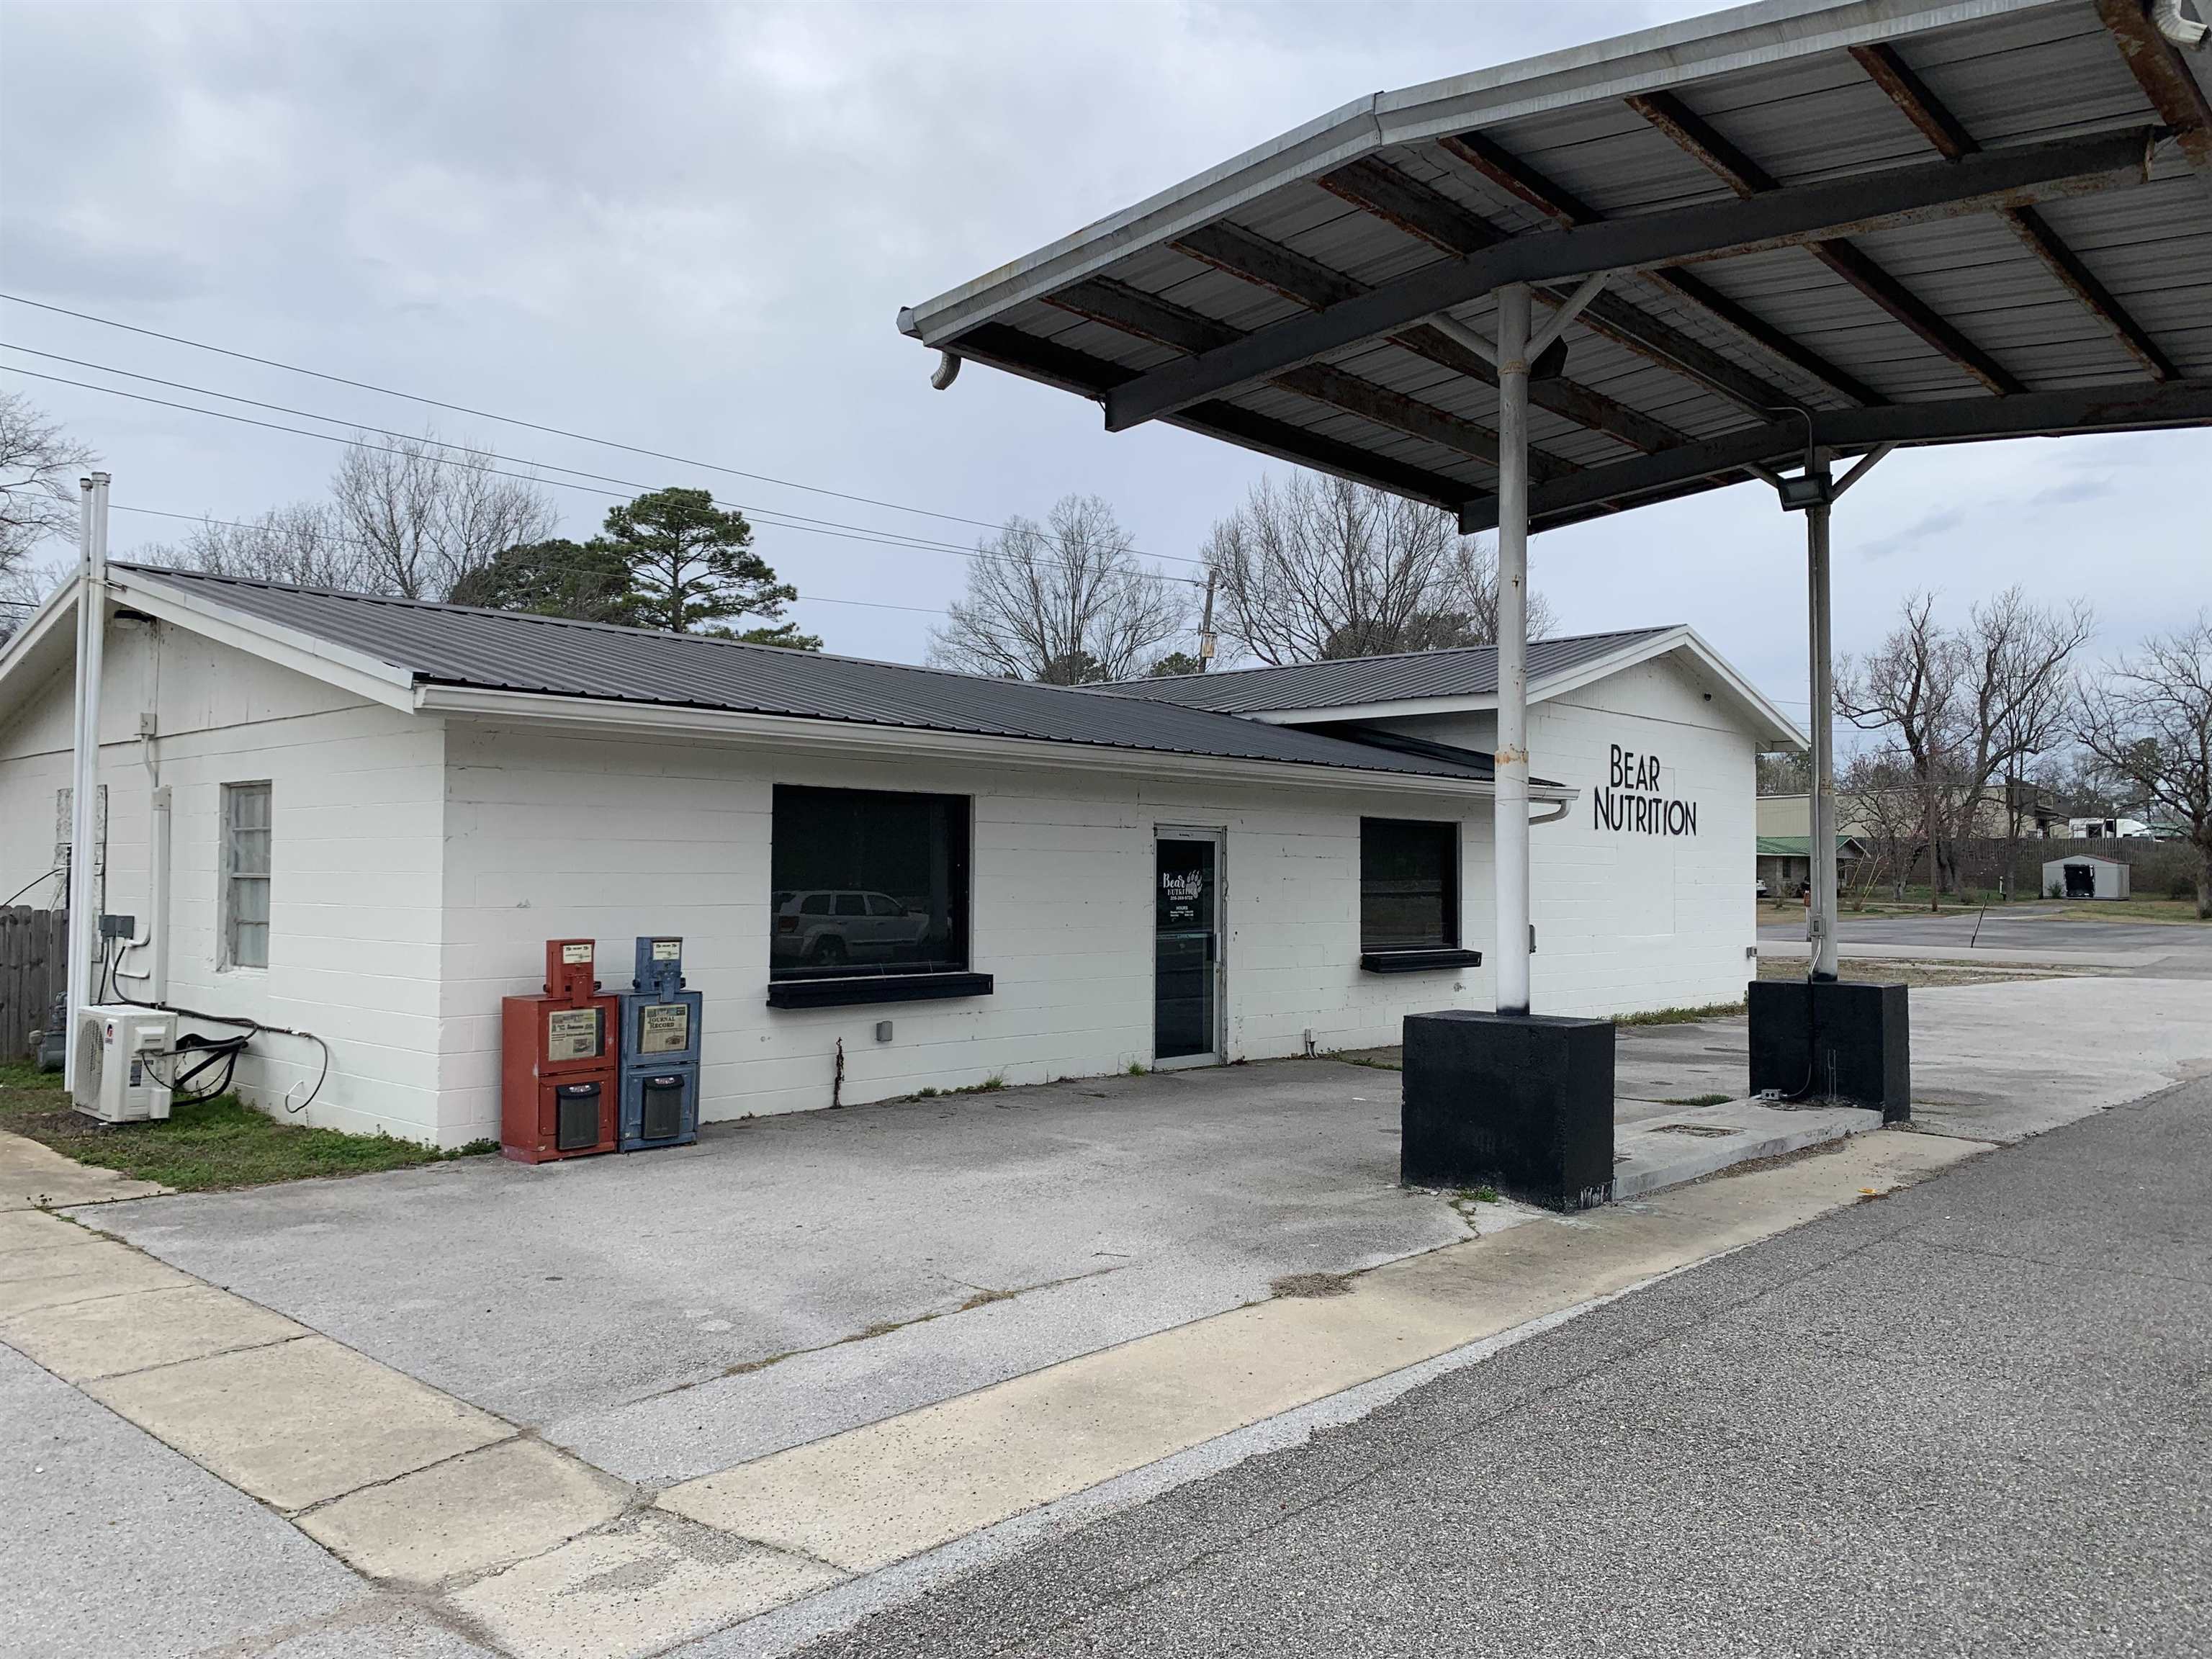 For Sale today is the Bar Creek Alabama Nutrition Building.  This business is located right beside the main Highway where traffic is abundant.  This building has been renovated and is suited to fit your business.  Call today for your showing.  Property is sold "A IS '" and buyer to verify all info.